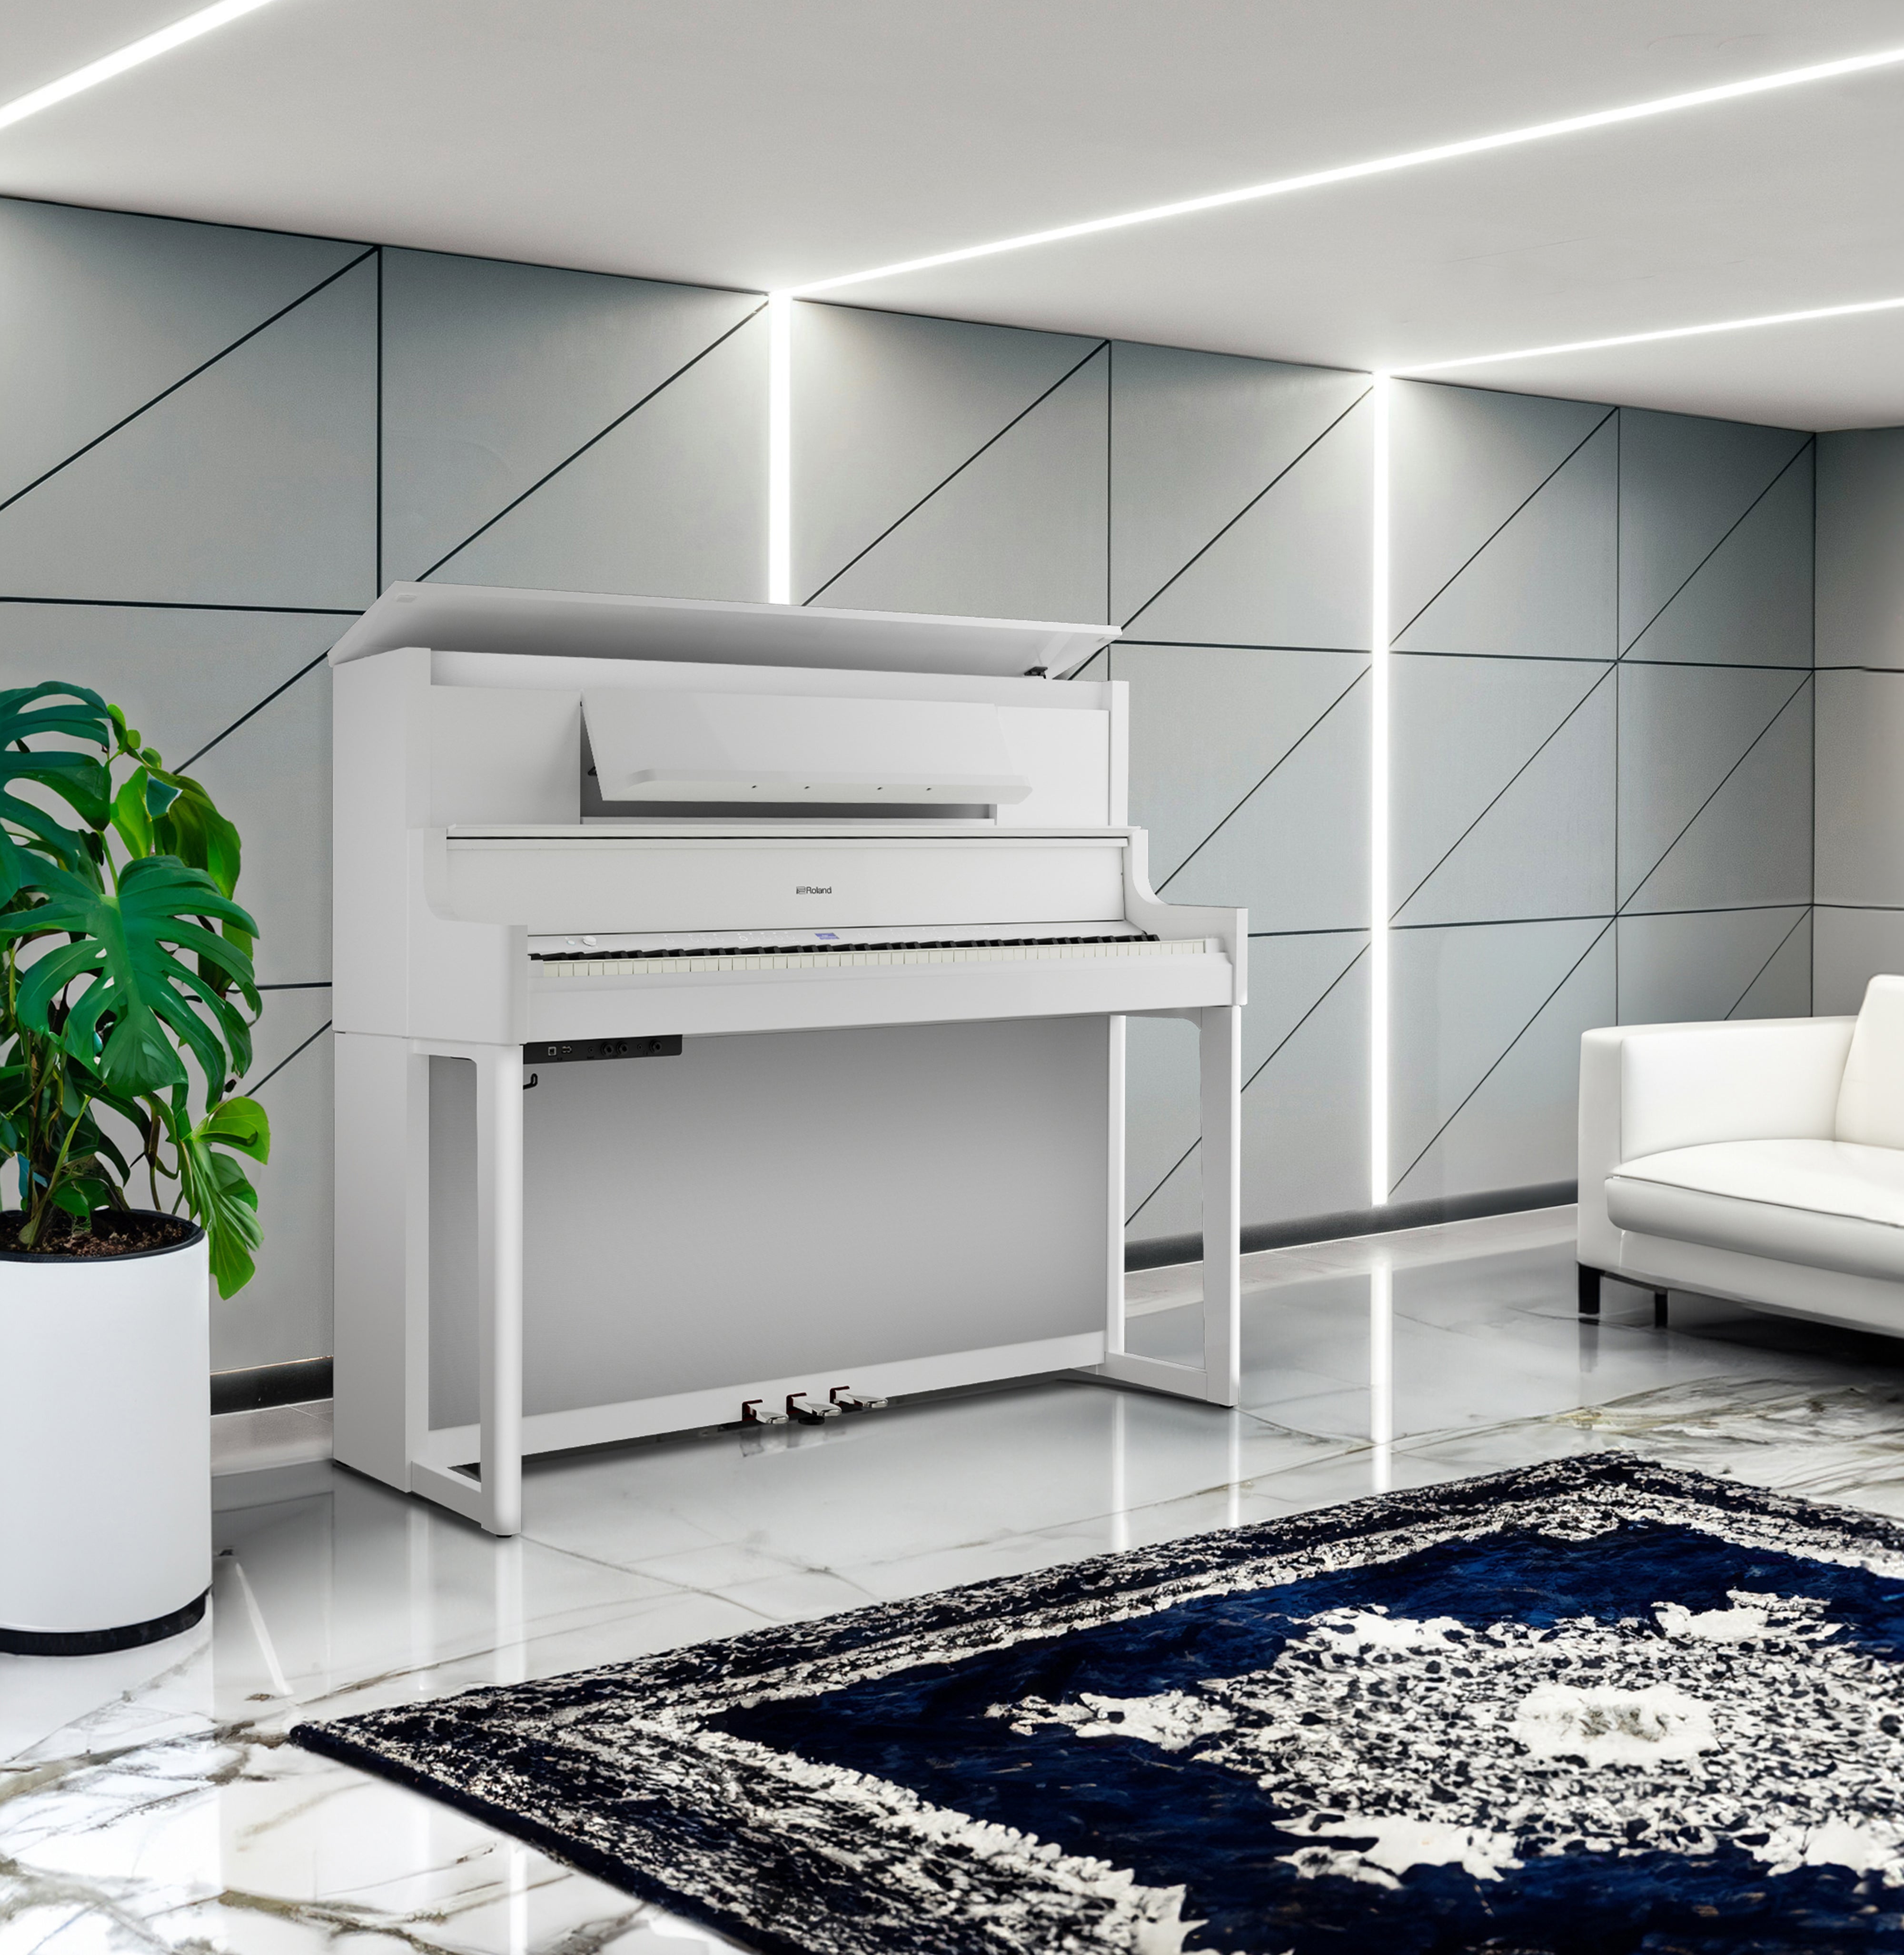 Roland LX-9 Digital Piano with Bench - Polished White - in a bright modern lobby